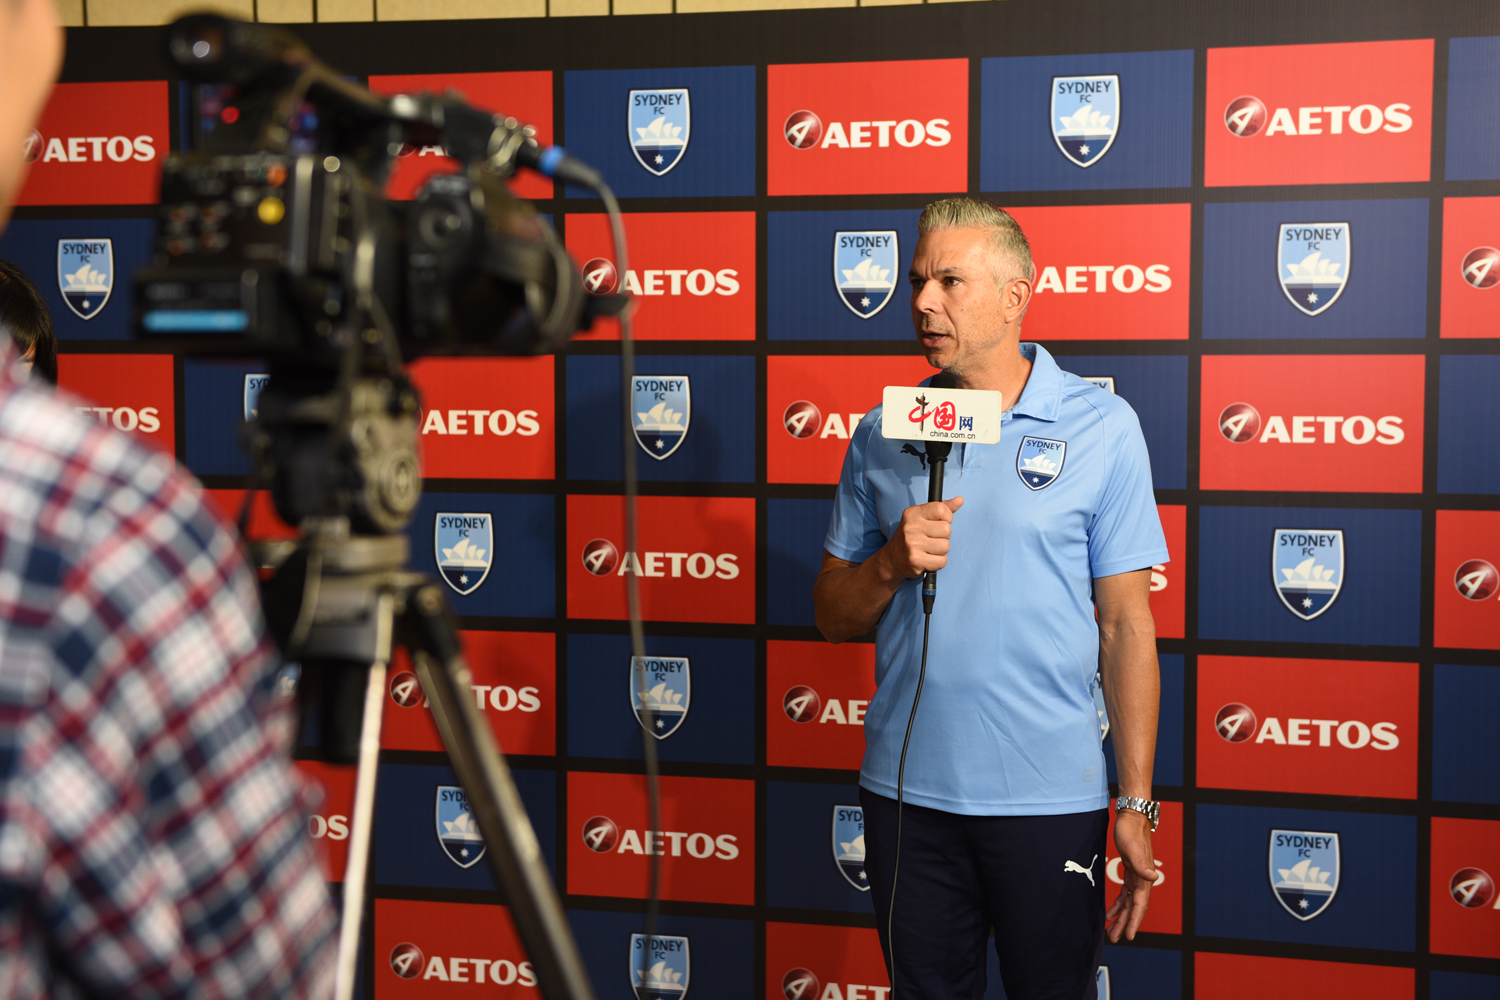 Sydney FC Head Coach Steve Corica will lead the team to qualify for the last 16 teams.